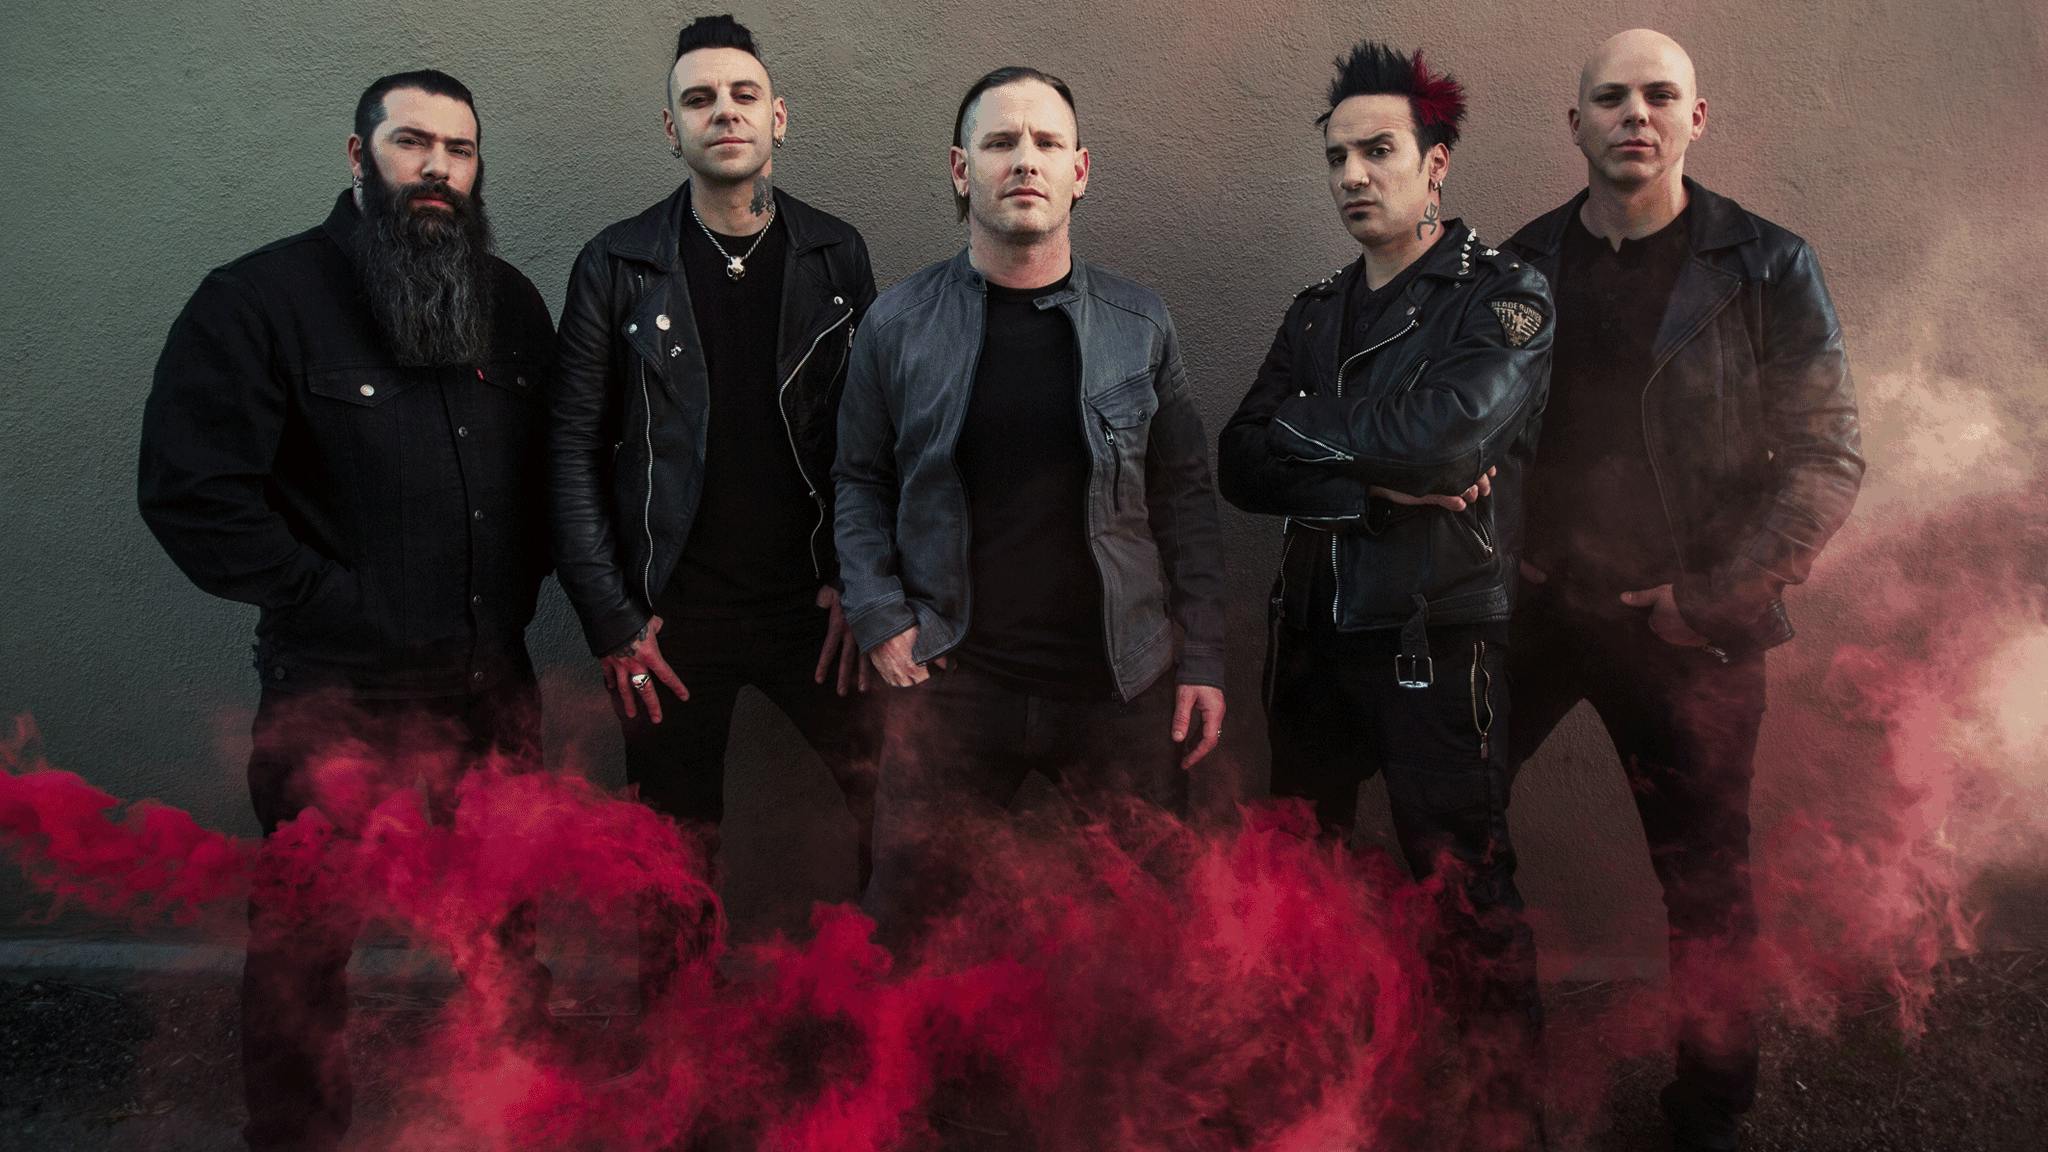 Corey Taylor still talks to Stone Sour bandmates, but says there are “hinderances”